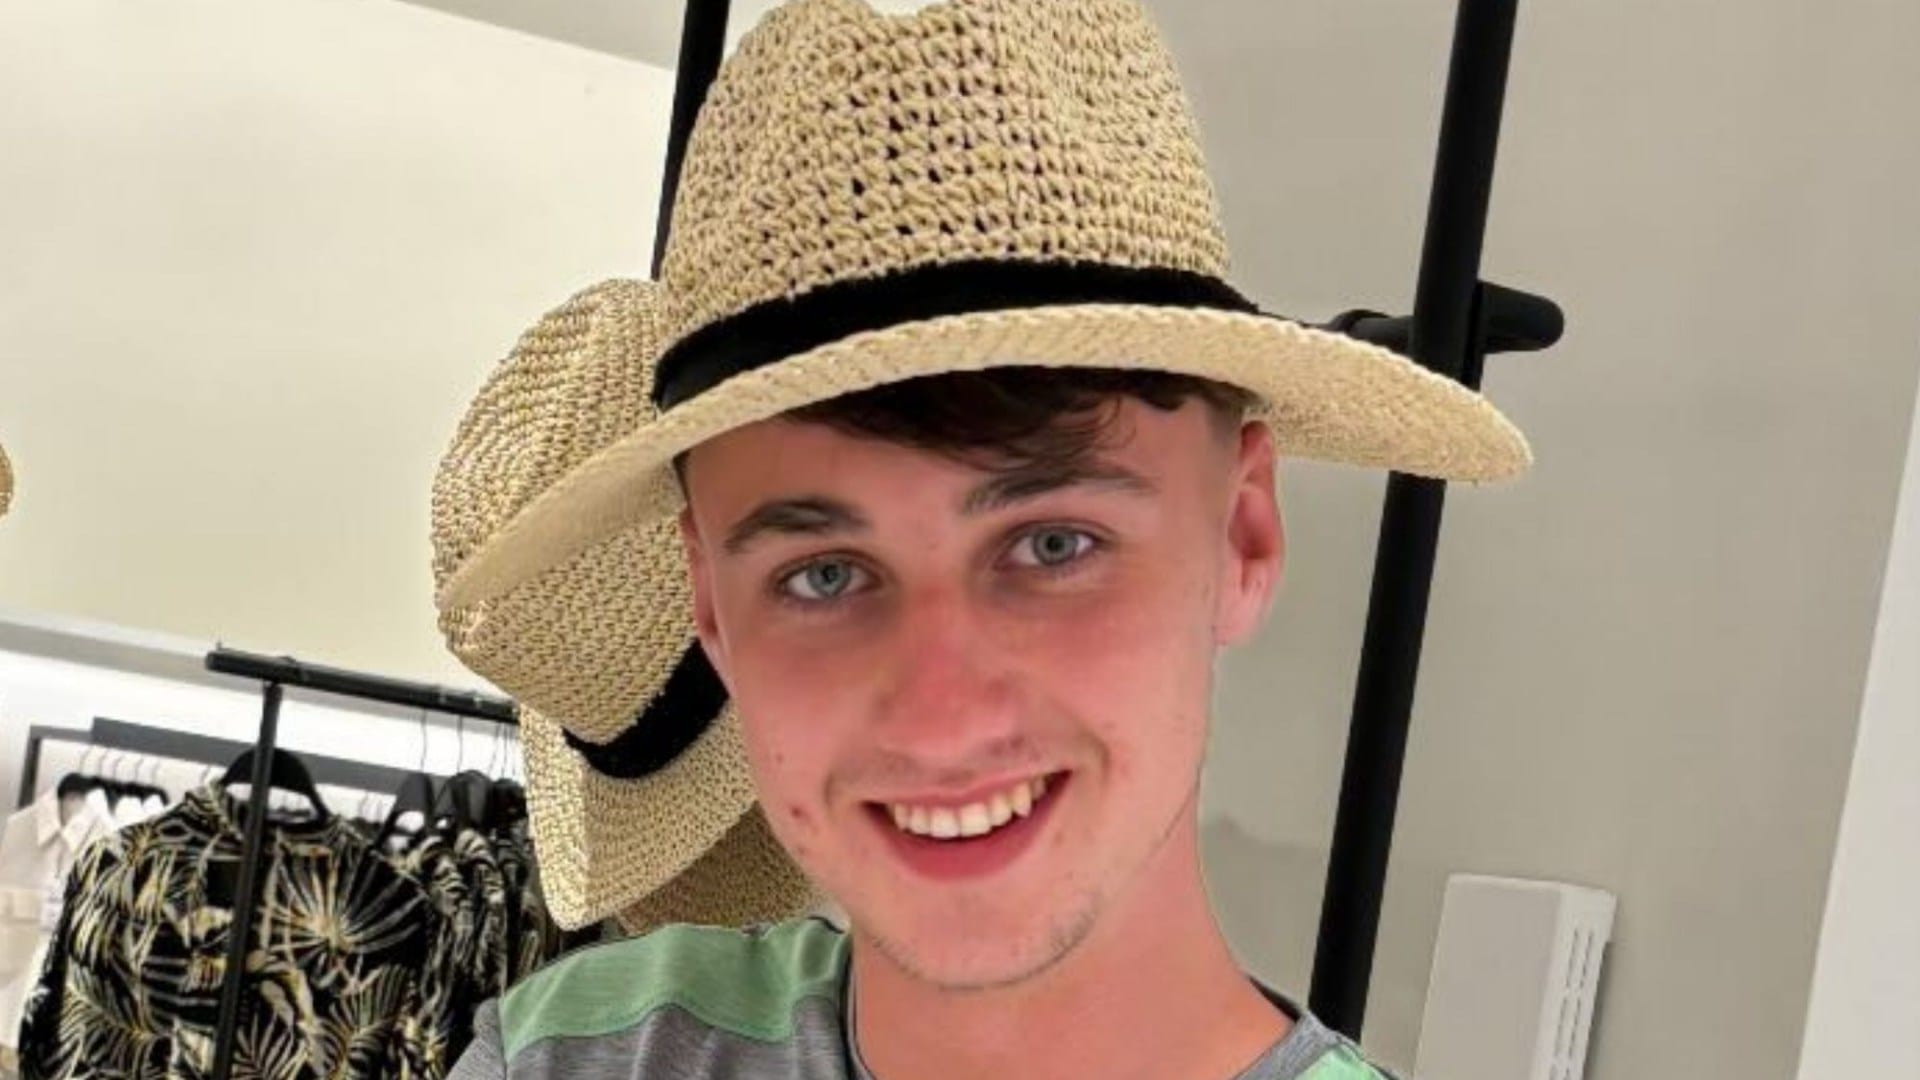 Friend of Jay Slater missing in Tenerife claims teen 'cut his leg on a cactus' and 'needed a drink' in final phone call